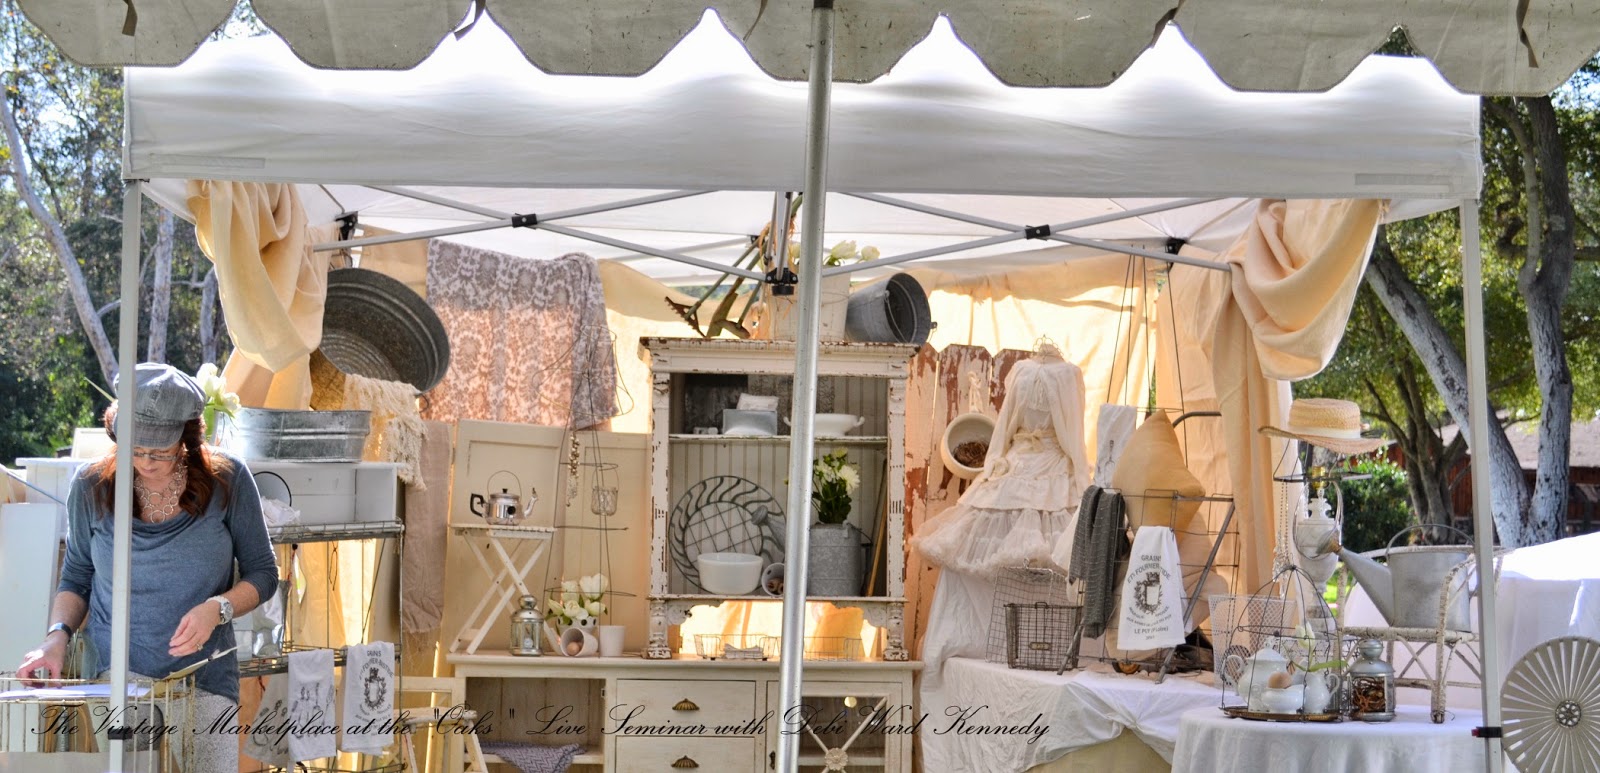 The Vintage Marketplace at the Oaks